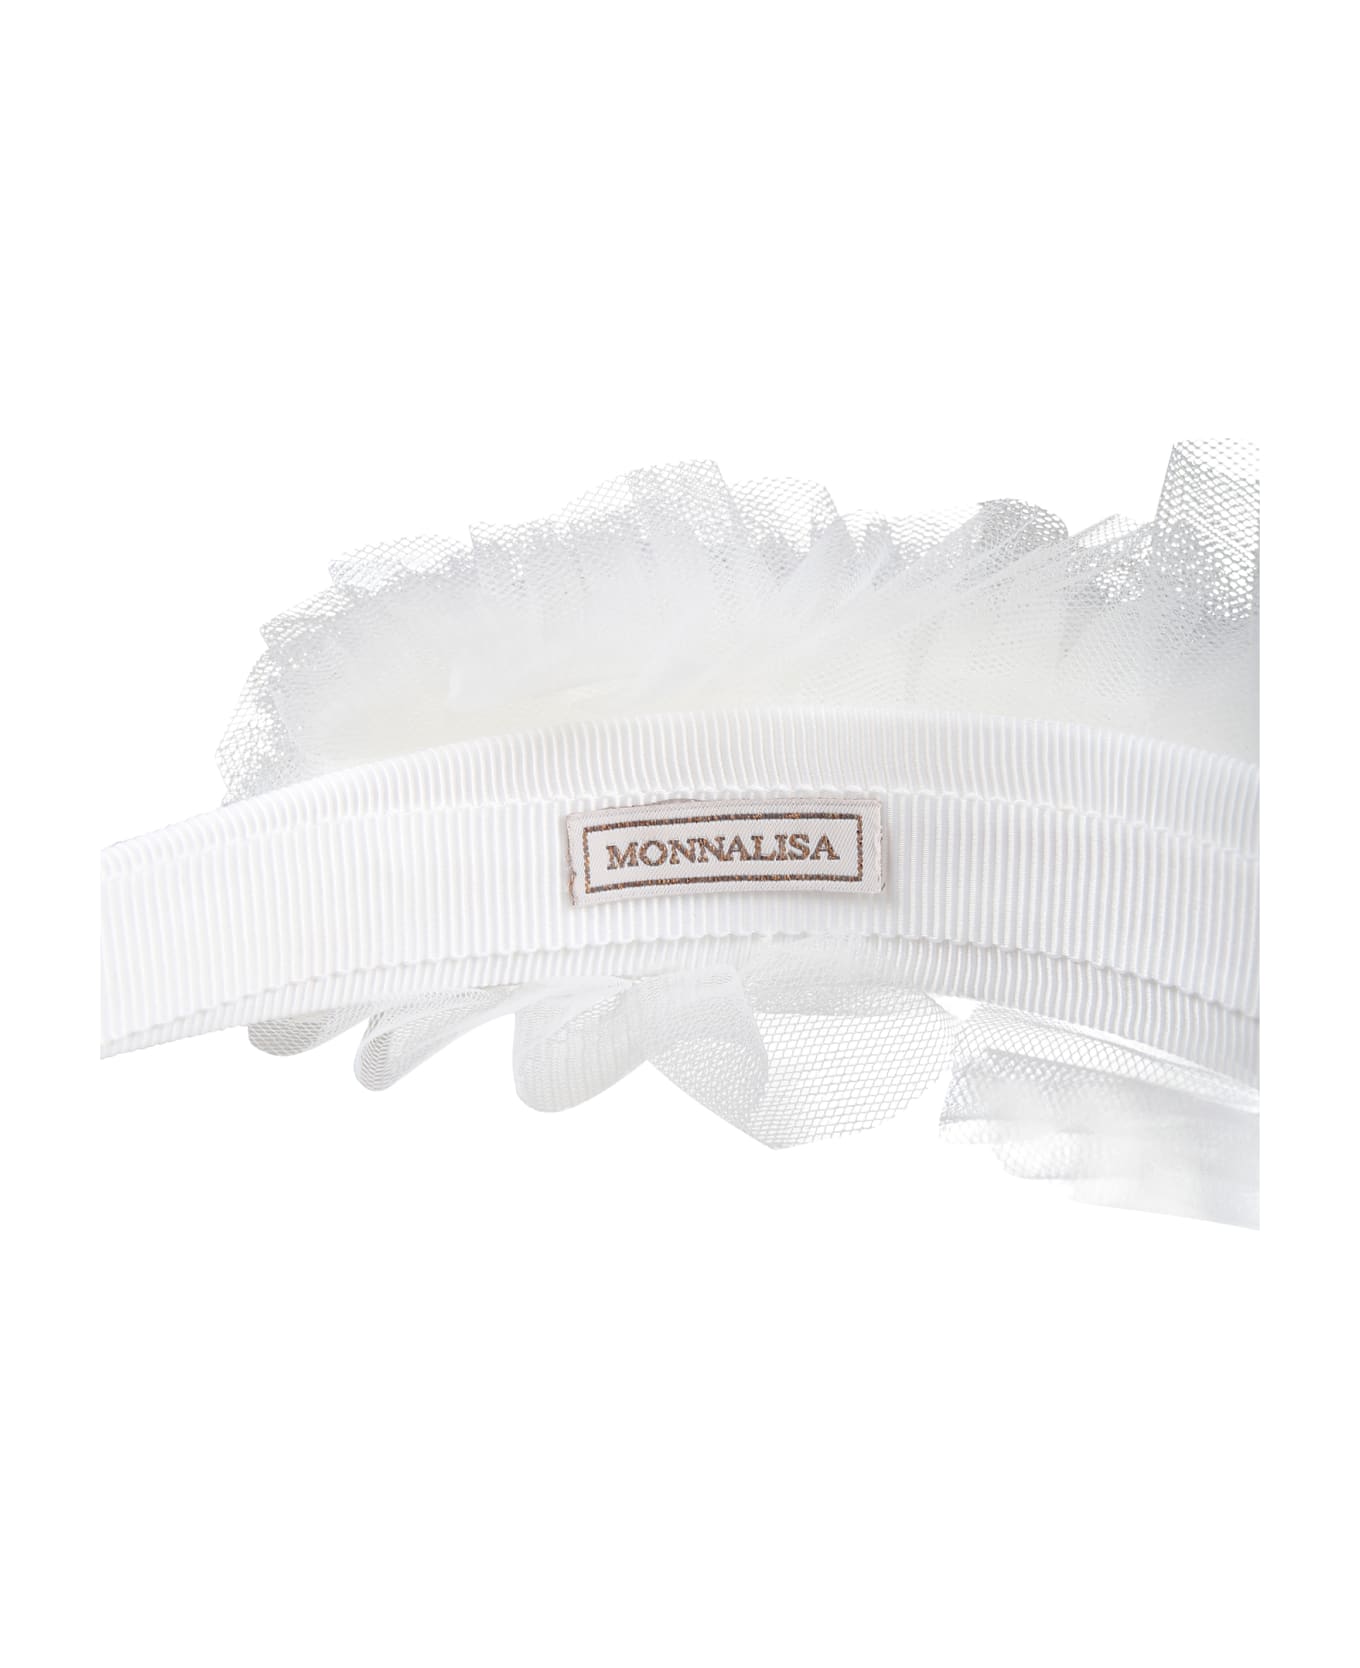 Monnalisa White Headband For Girl With Tulle - White アクセサリー＆ギフト